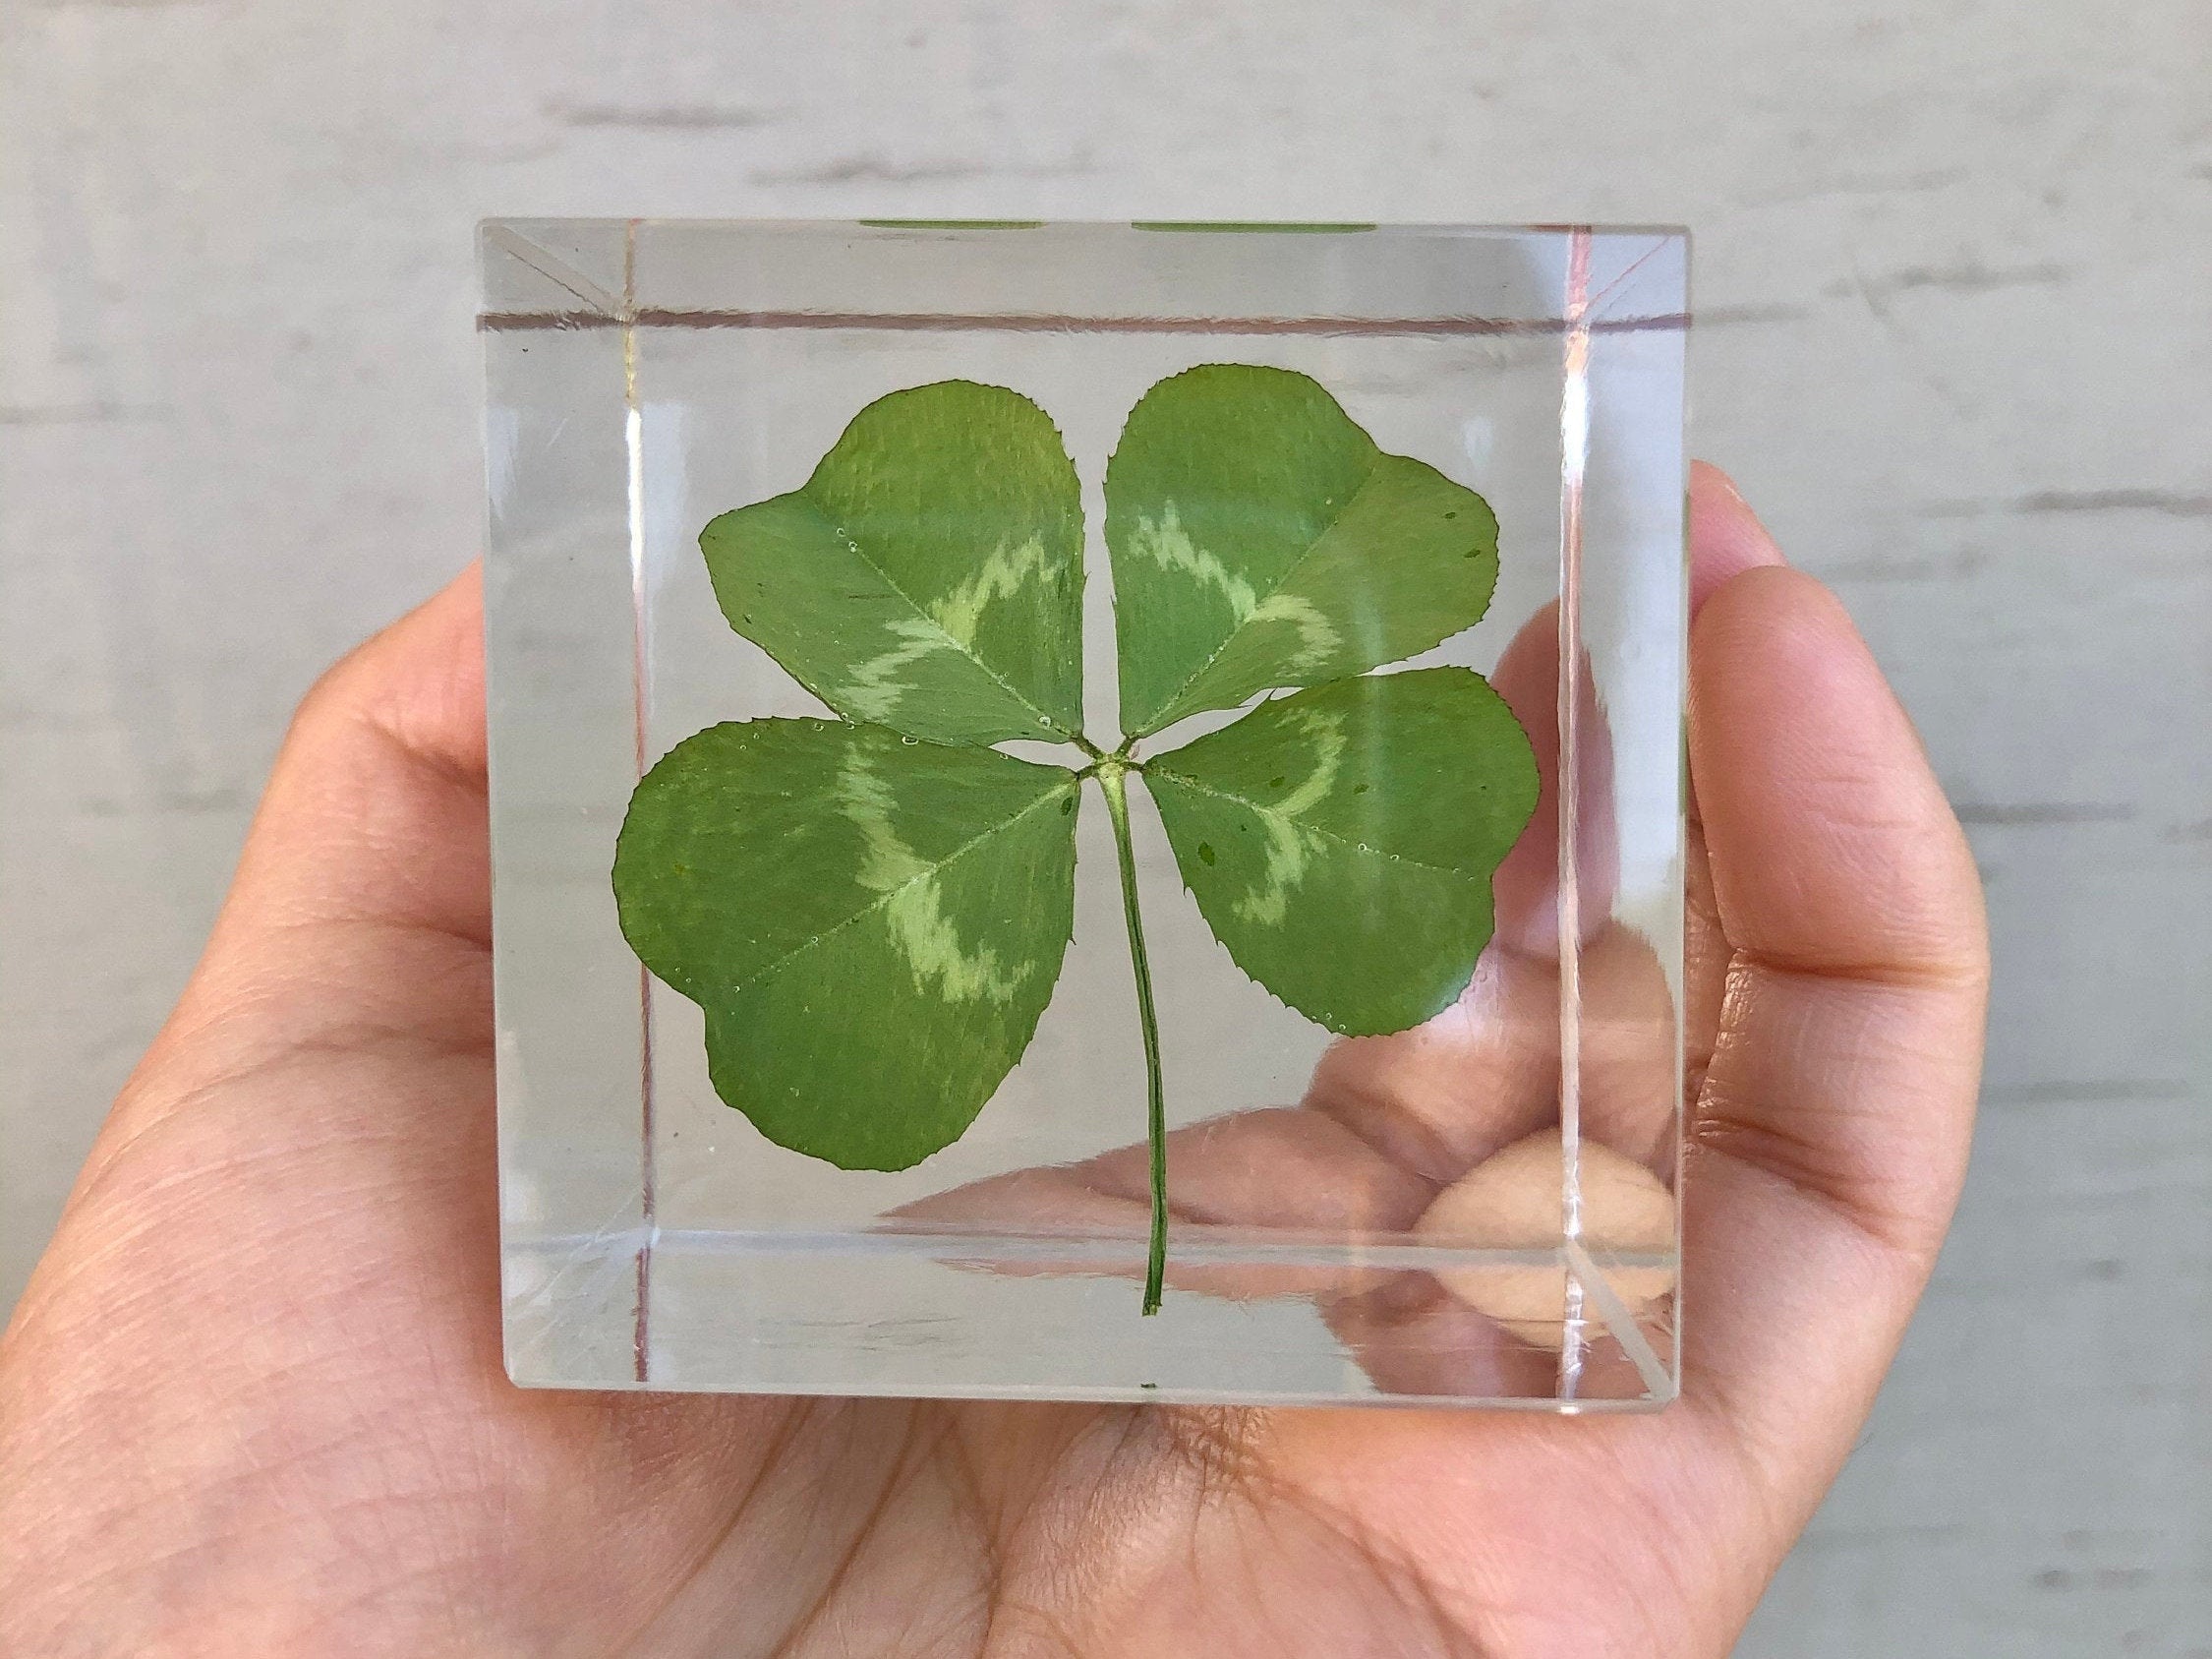 How to Find a Four-Leaf Clover - The New York Times